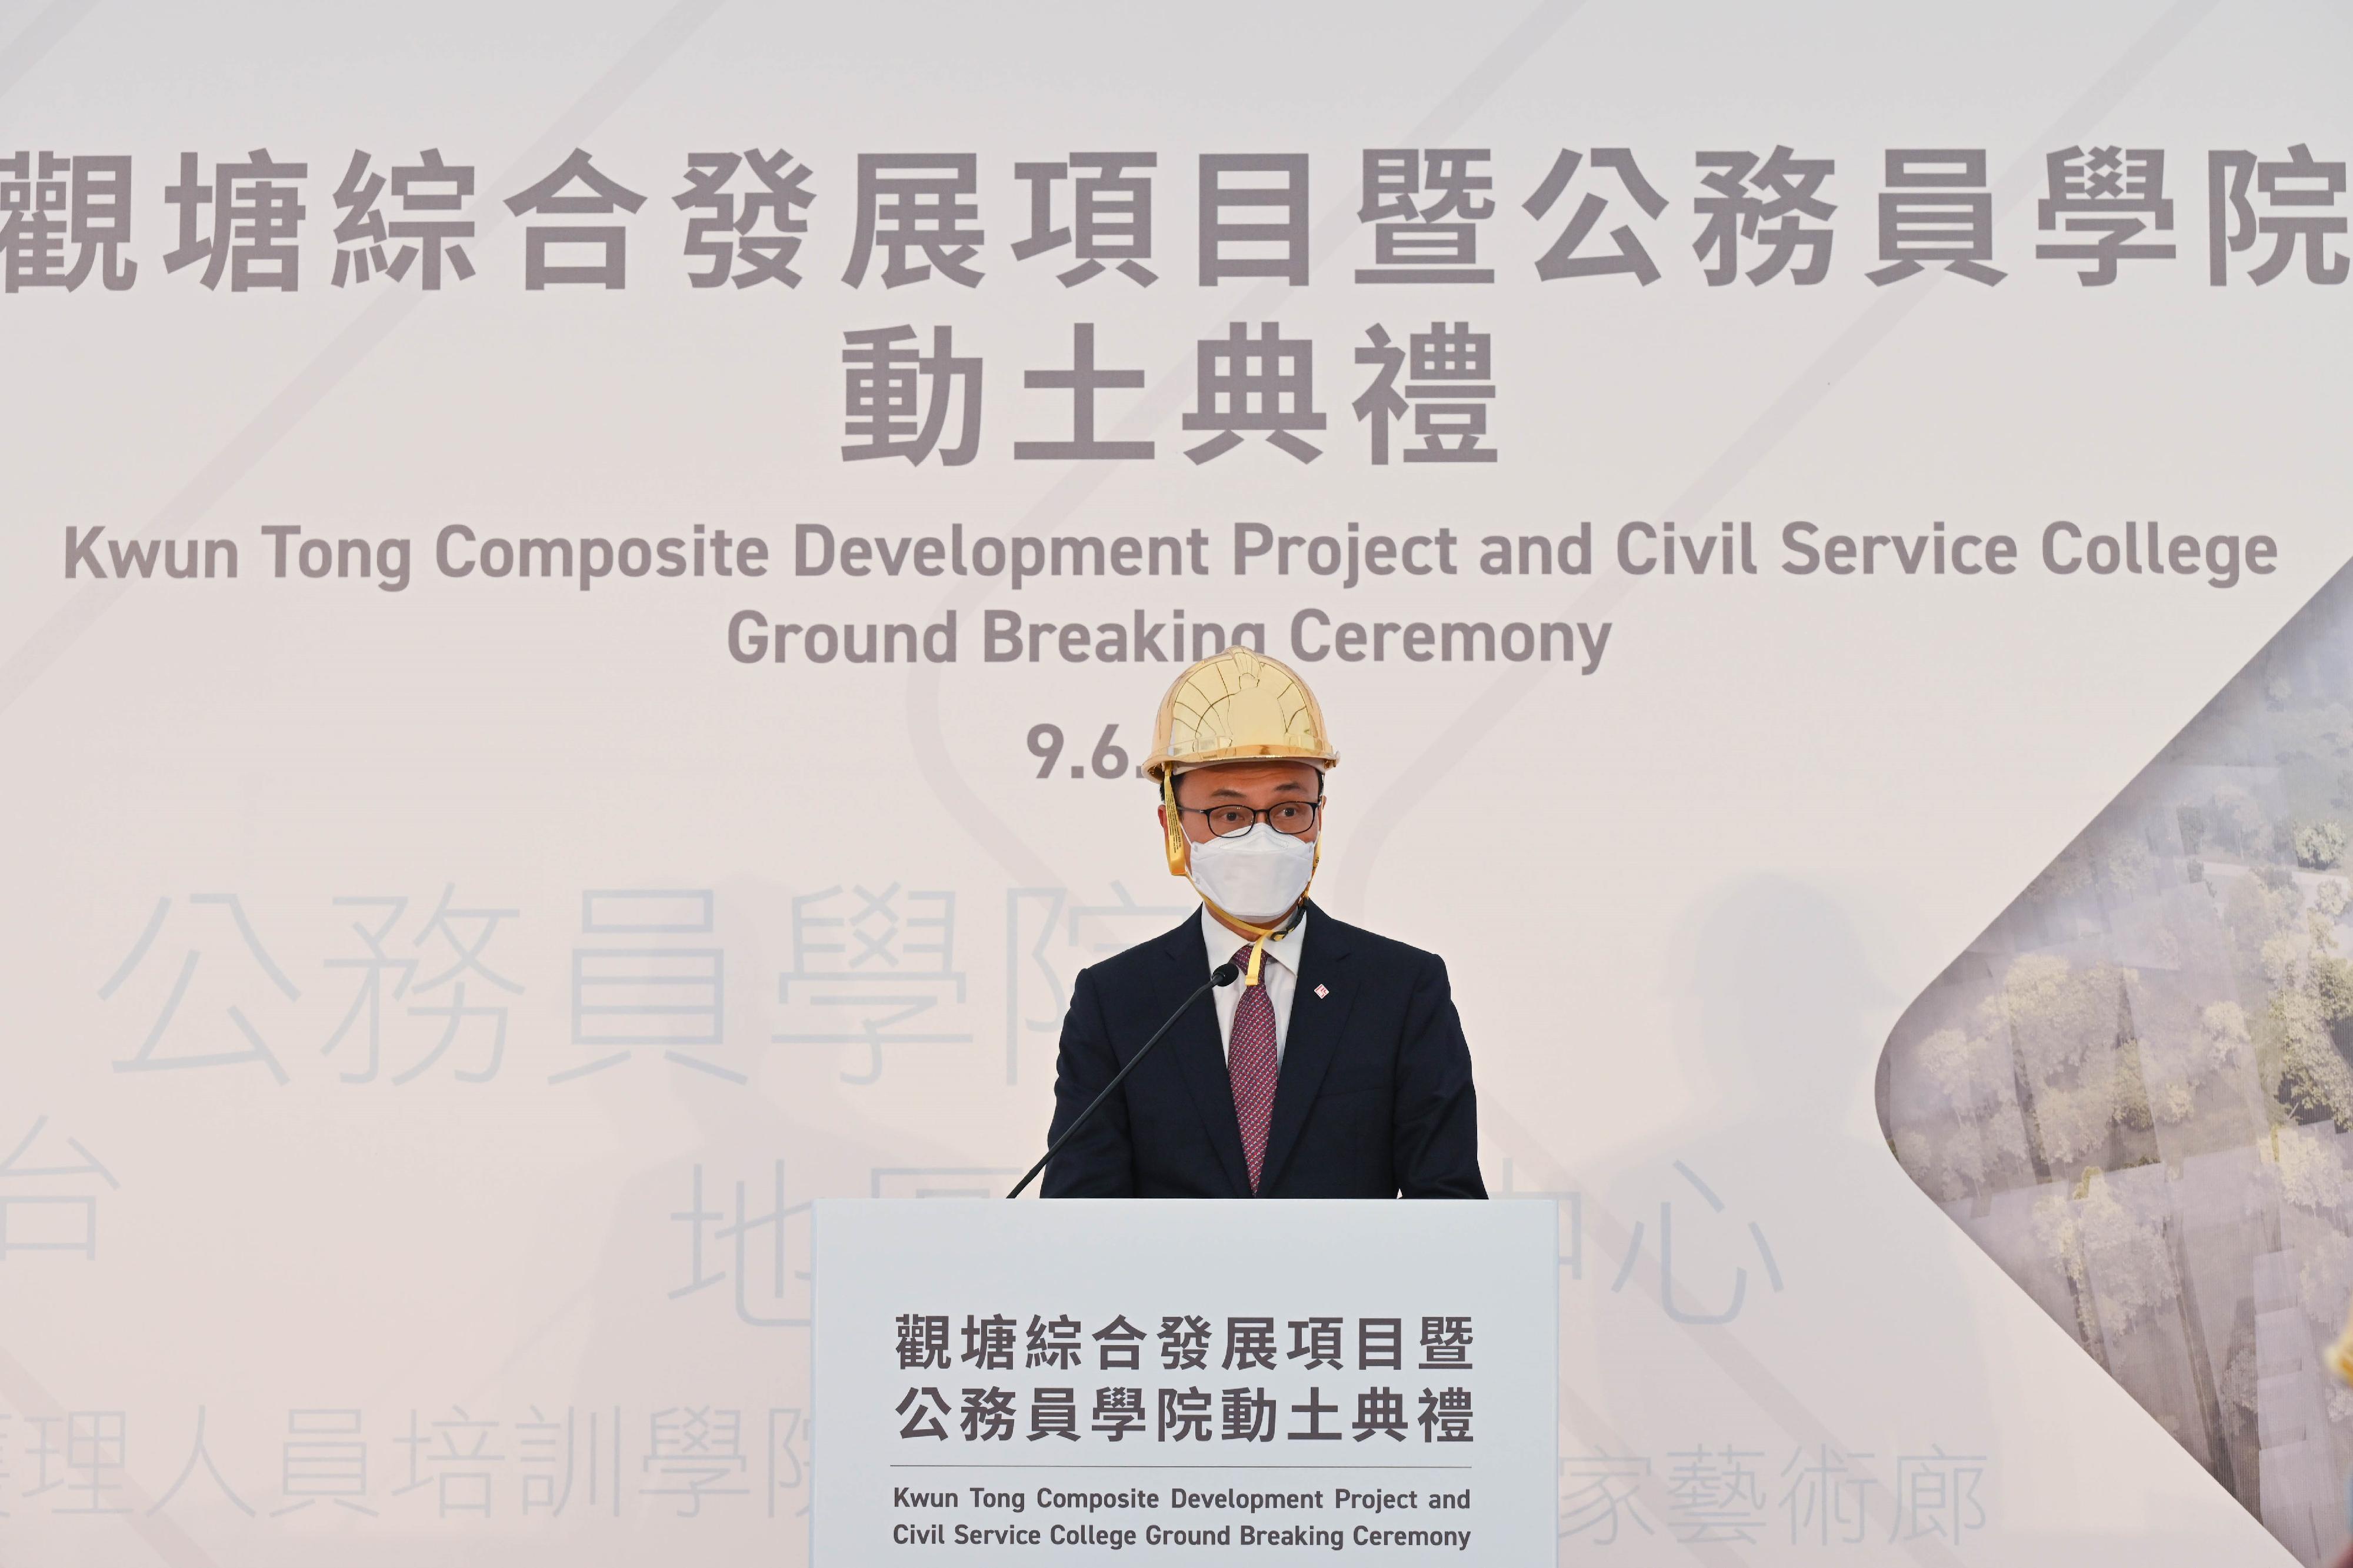 The ground breaking ceremony of the Kwun Tong Composite Development Project and Civil Service College took place today (June 9) to mark the launch of the construction project. Photo shows the Secretary for the Civil Service, Mr Patrick Nip, delivering a speech at the ceremony.